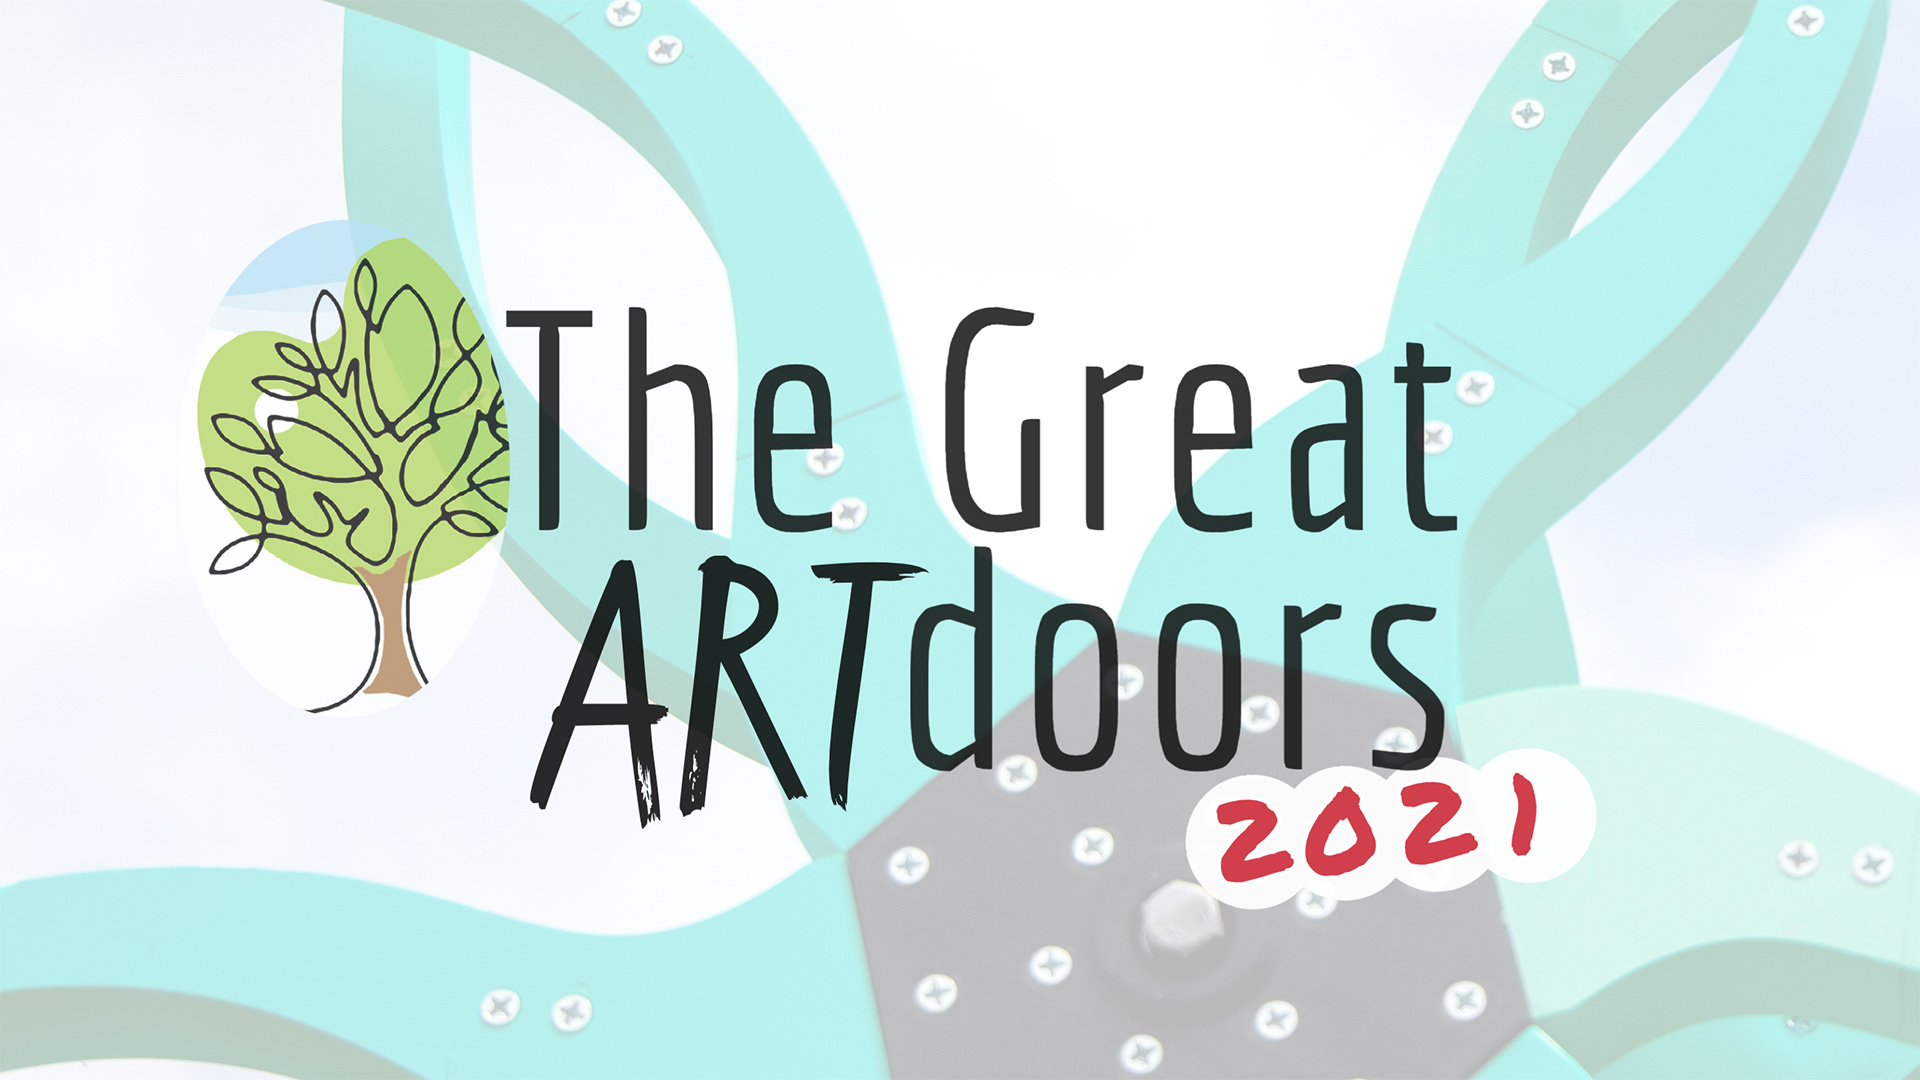 A drawing of a tree with the words 'The Great ARTdoors 2021' in front of a sculpture 